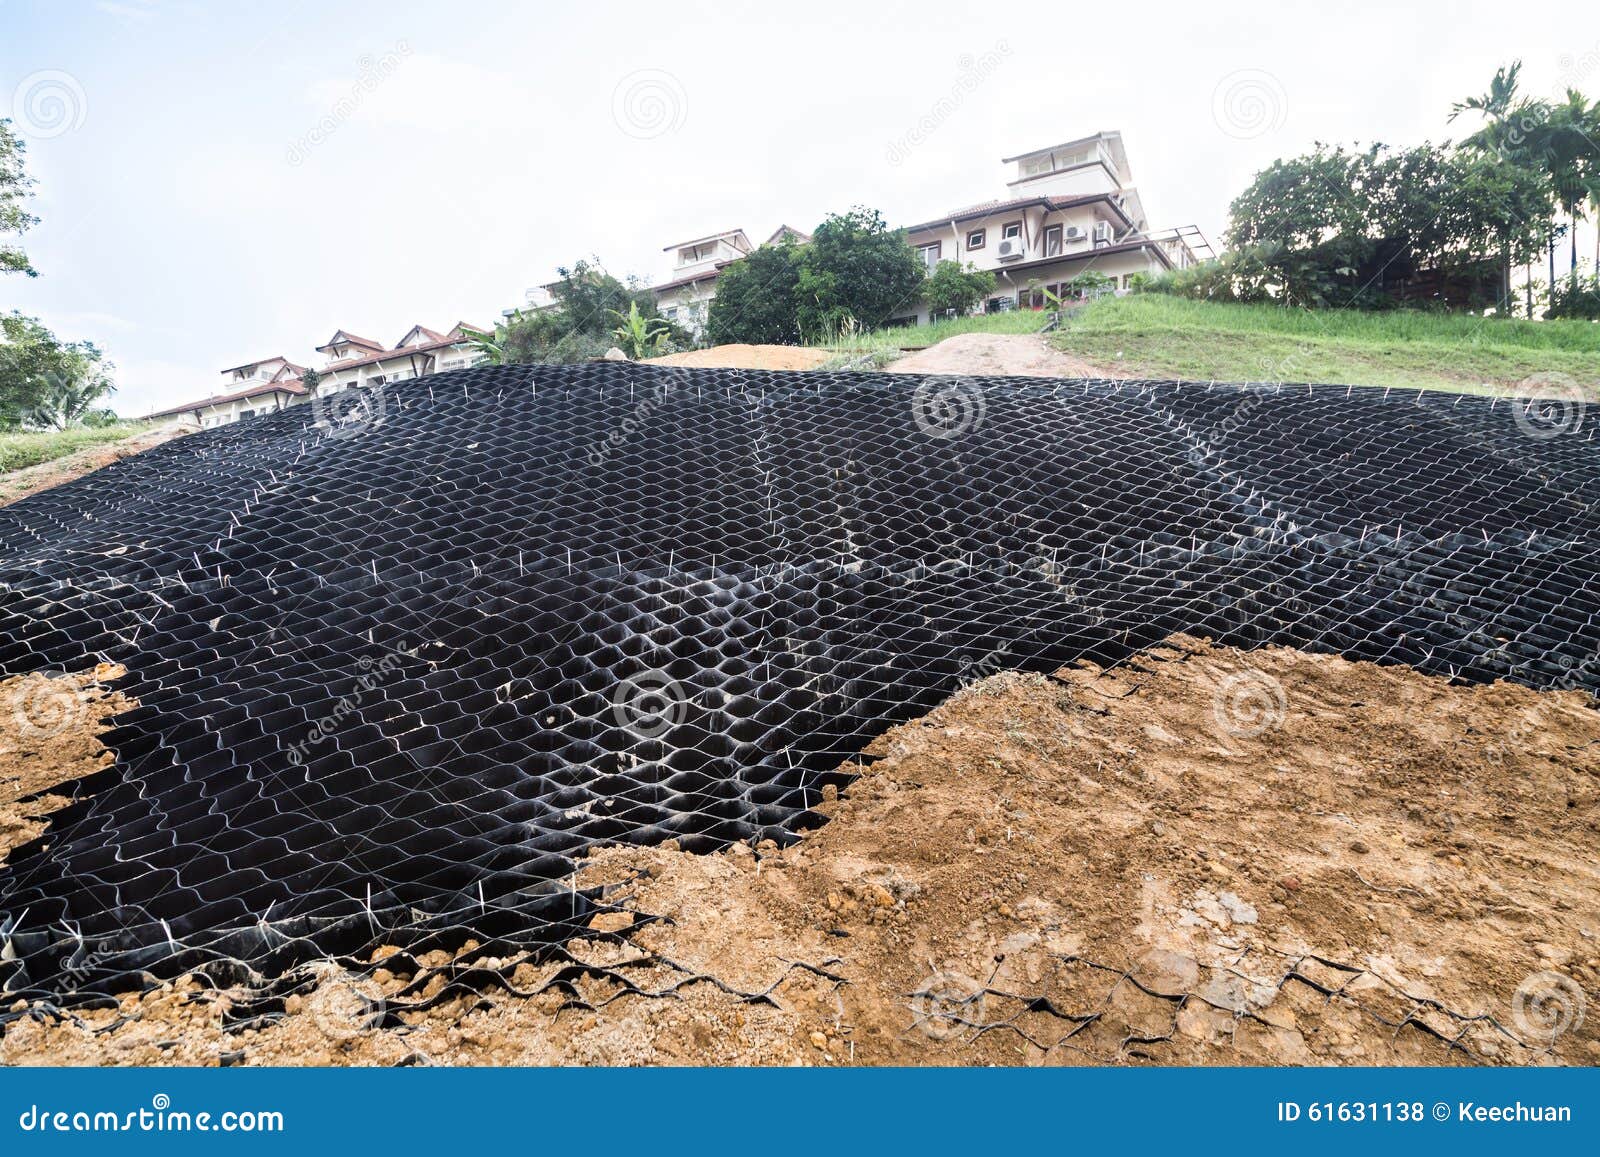 slope erosion control with grids and earth on steep slope.